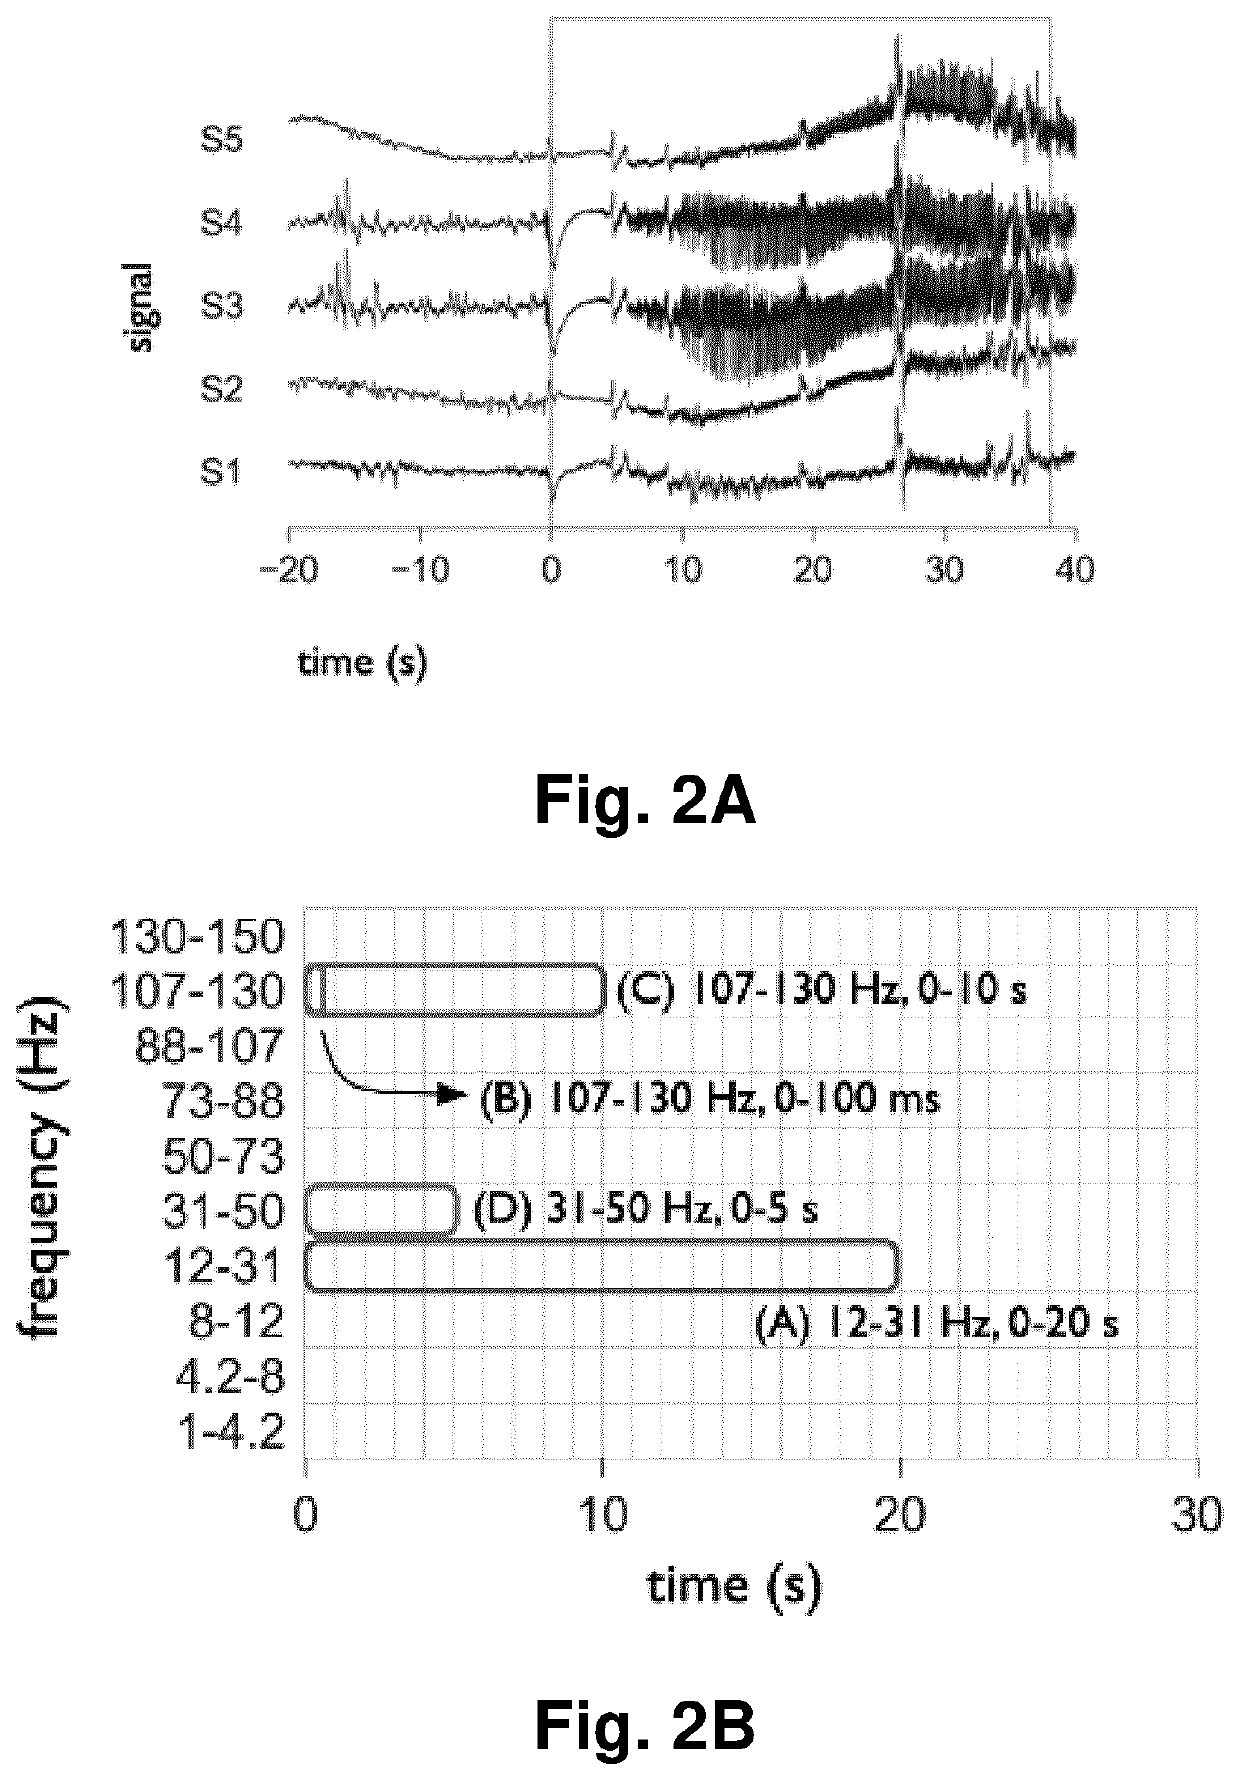 A computer implemented method and computer program products for identifying time-frequency features of physiological events